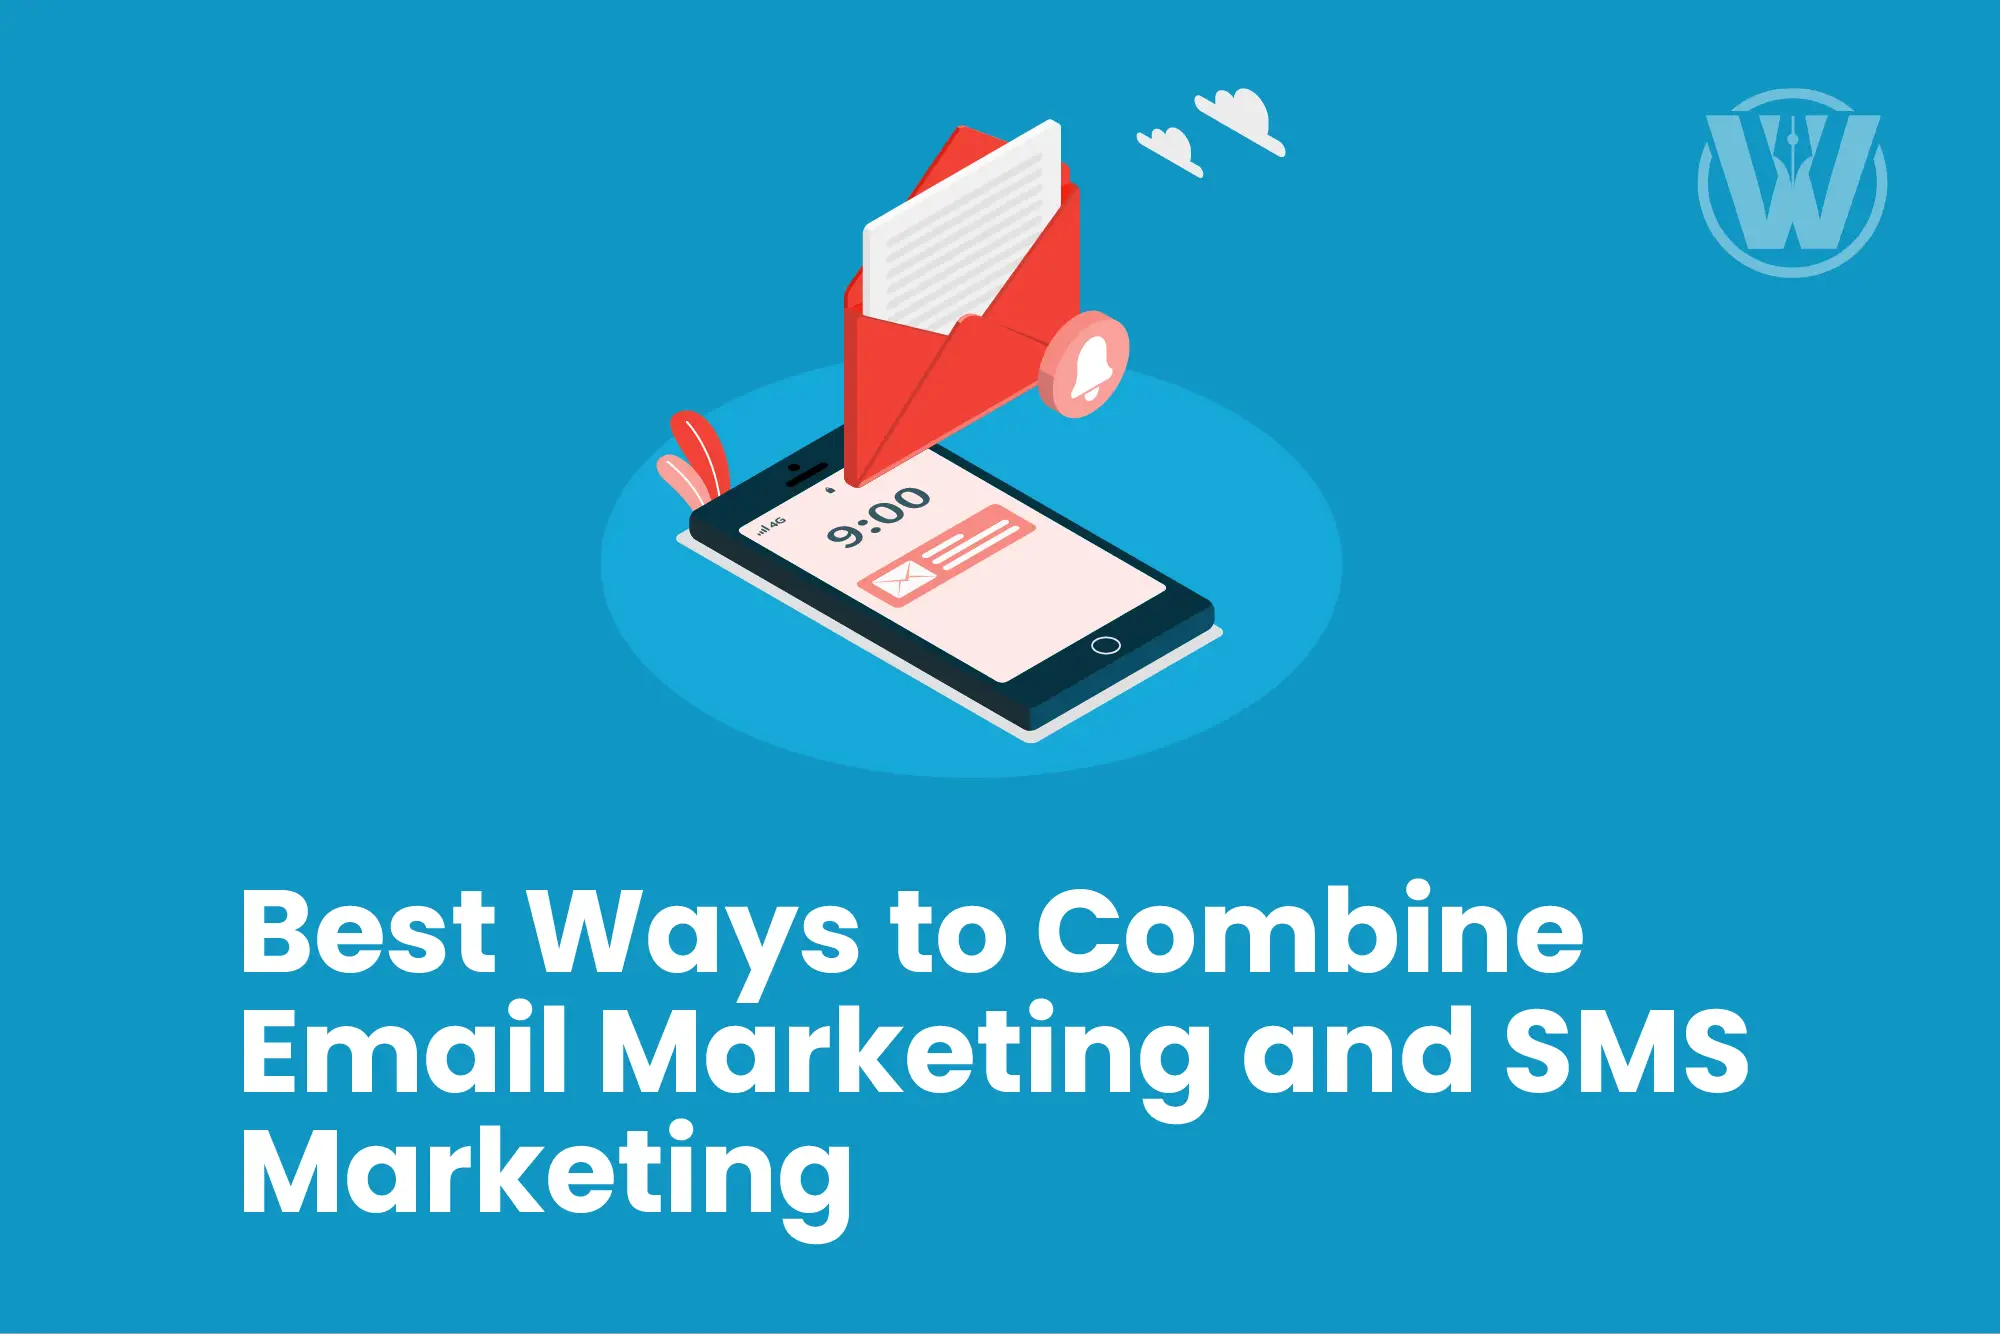 sms and email marketing